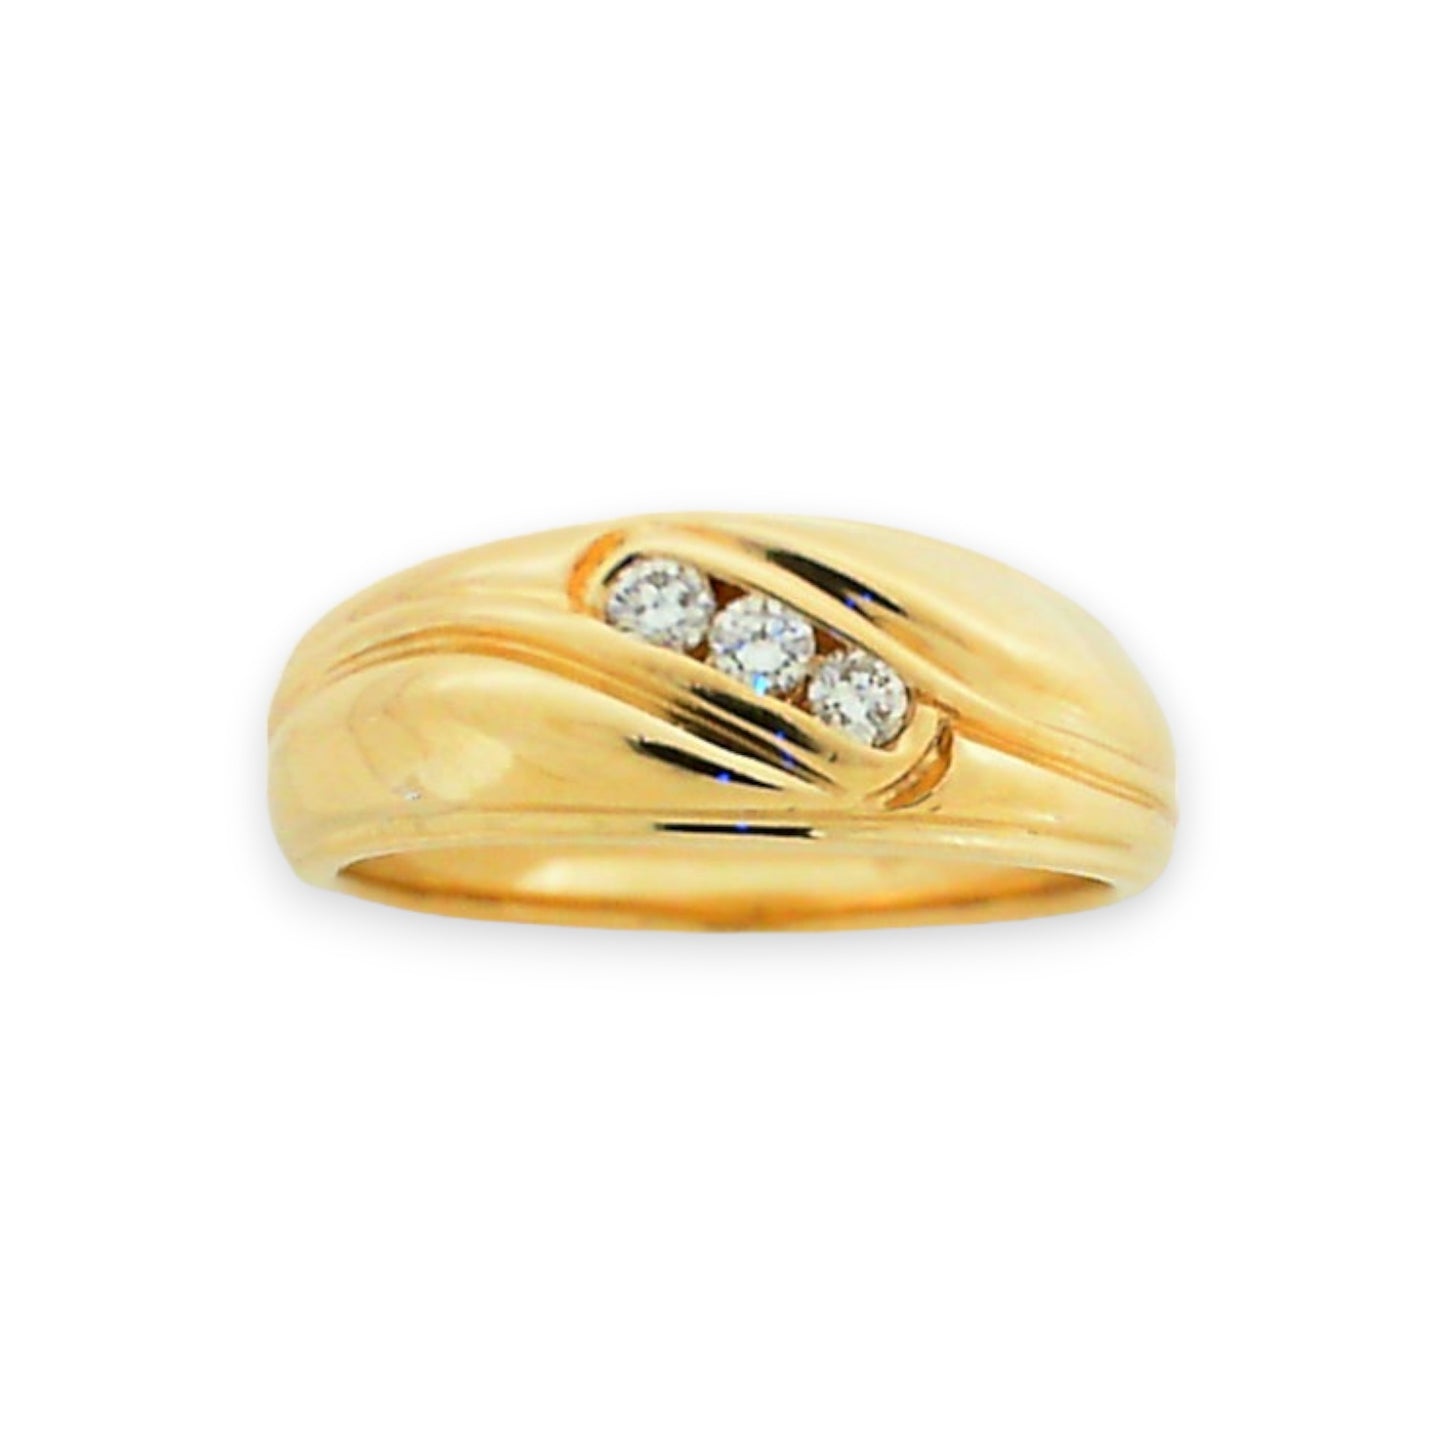 Vintage Men's Yellow Gold Tapered Wedding Band